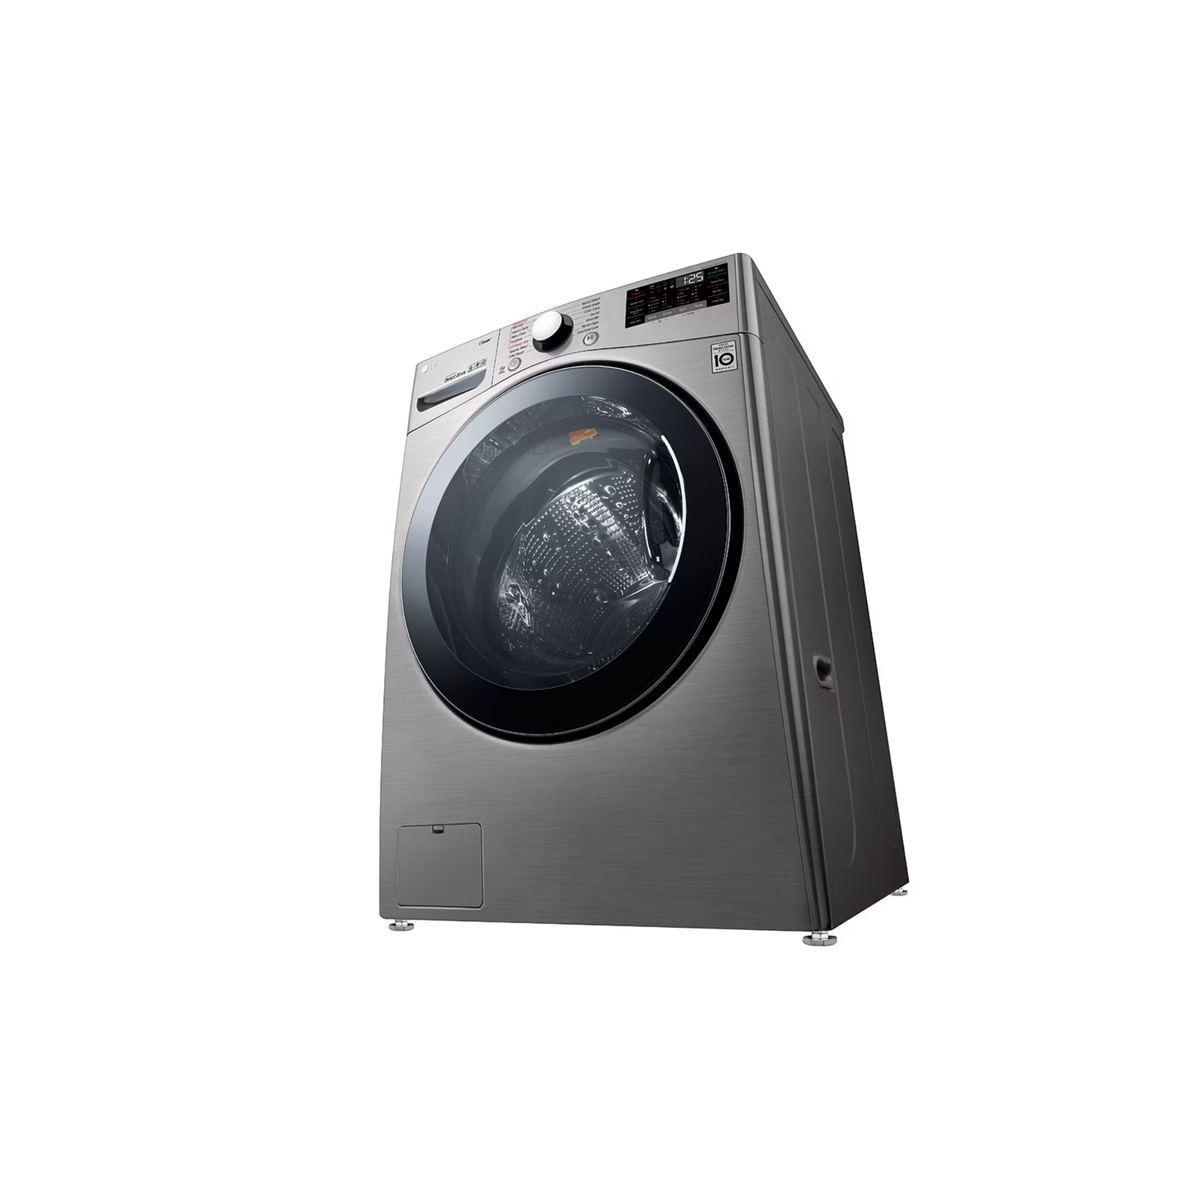 LG Front Load Washing Machine, 24 kg, 1100 RPM, Stainless Silver, F0P3CYVDT